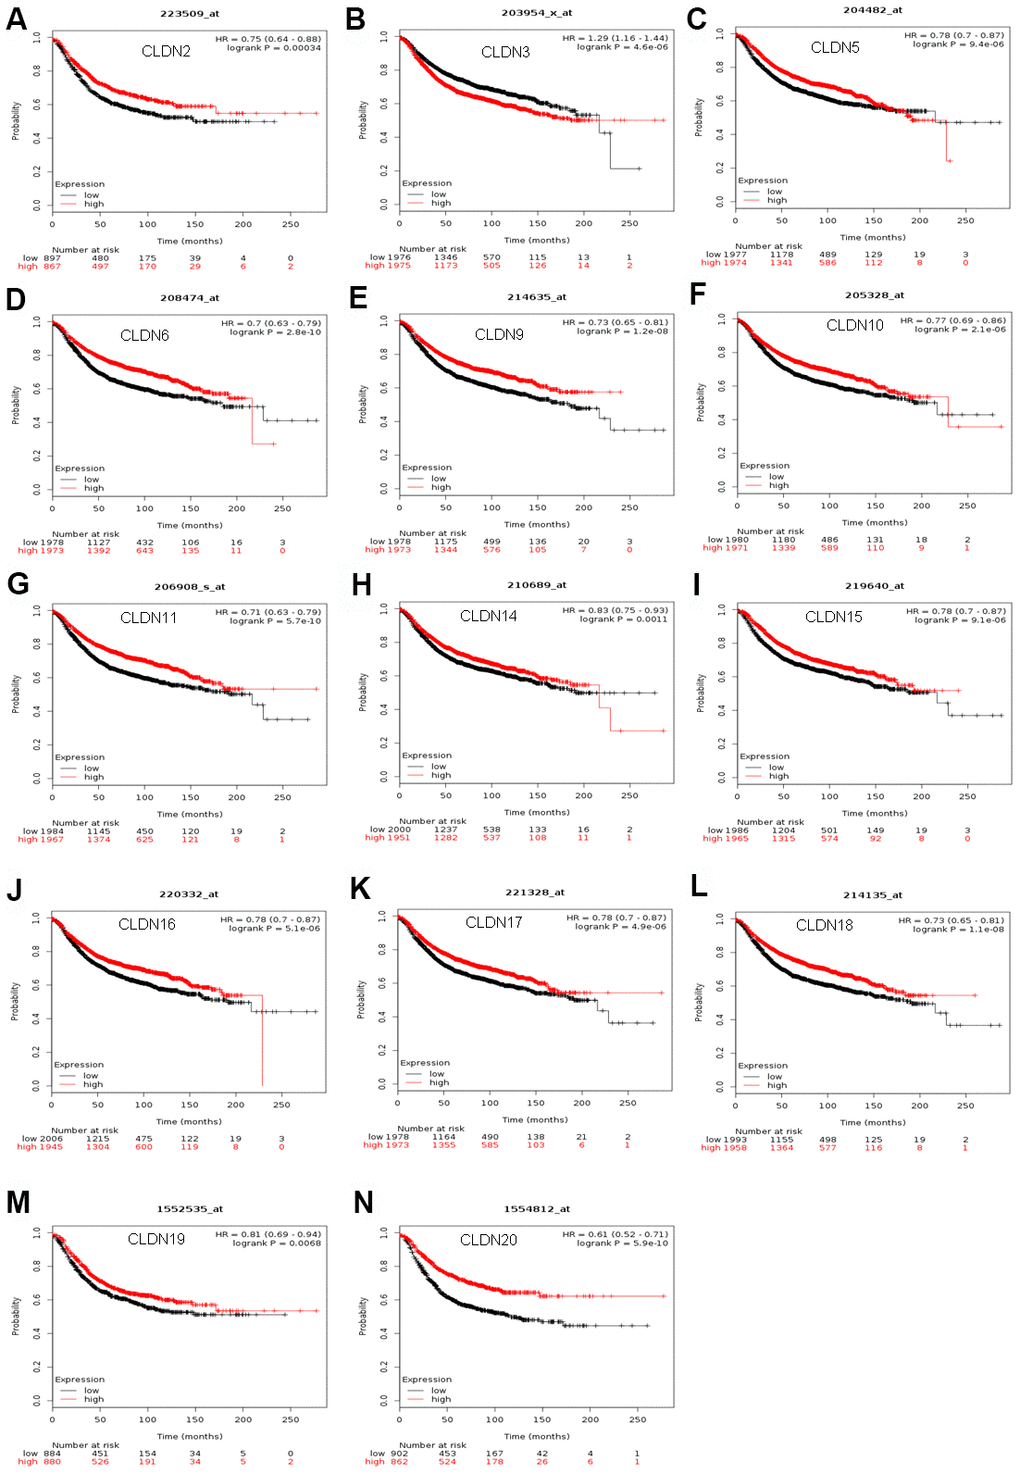 The RFS of mRNA levels of claudins in all patients with breast cancer (Kaplan–Meier plotter). (A) CLDN2; (B) CLDN3; (C) CLDN5; (D) CLDN6; (E) CLDN9; (F) CLDN10; (G) CLDN11; (H) CLDN14; (I) CLDN15; (J) CLDN16; (K) CLDN17; (L) CLDN18; (M) CLDN19; (N) CLDN20. Abbreviation: RFS, relapse-free survival.